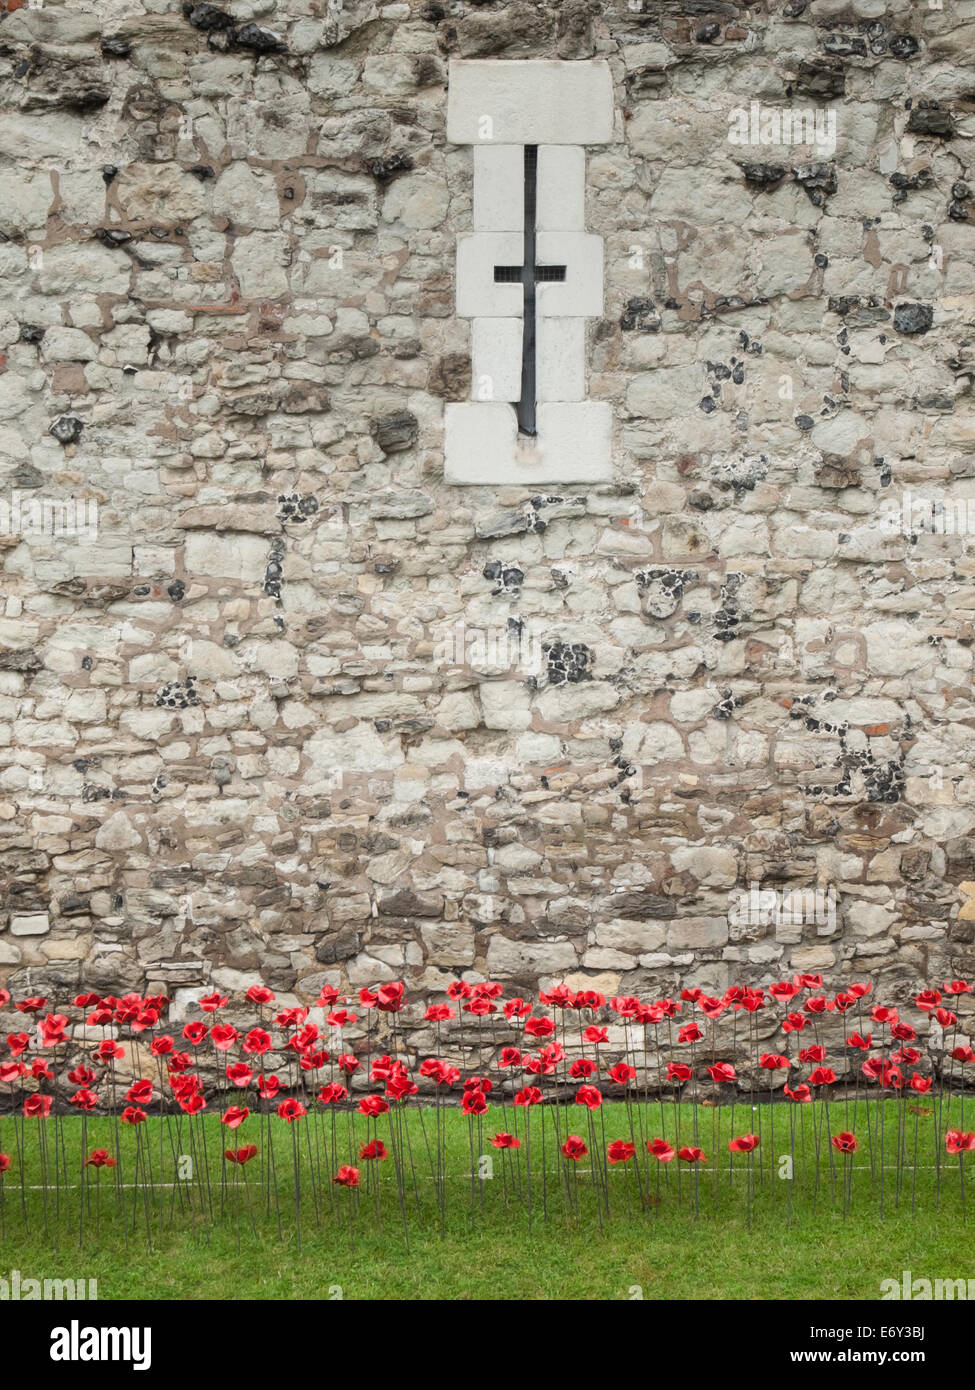 detail of the ceramic poppies exhibit  at the tower of london during heavy rain with the tower wall behind. Stock Photo